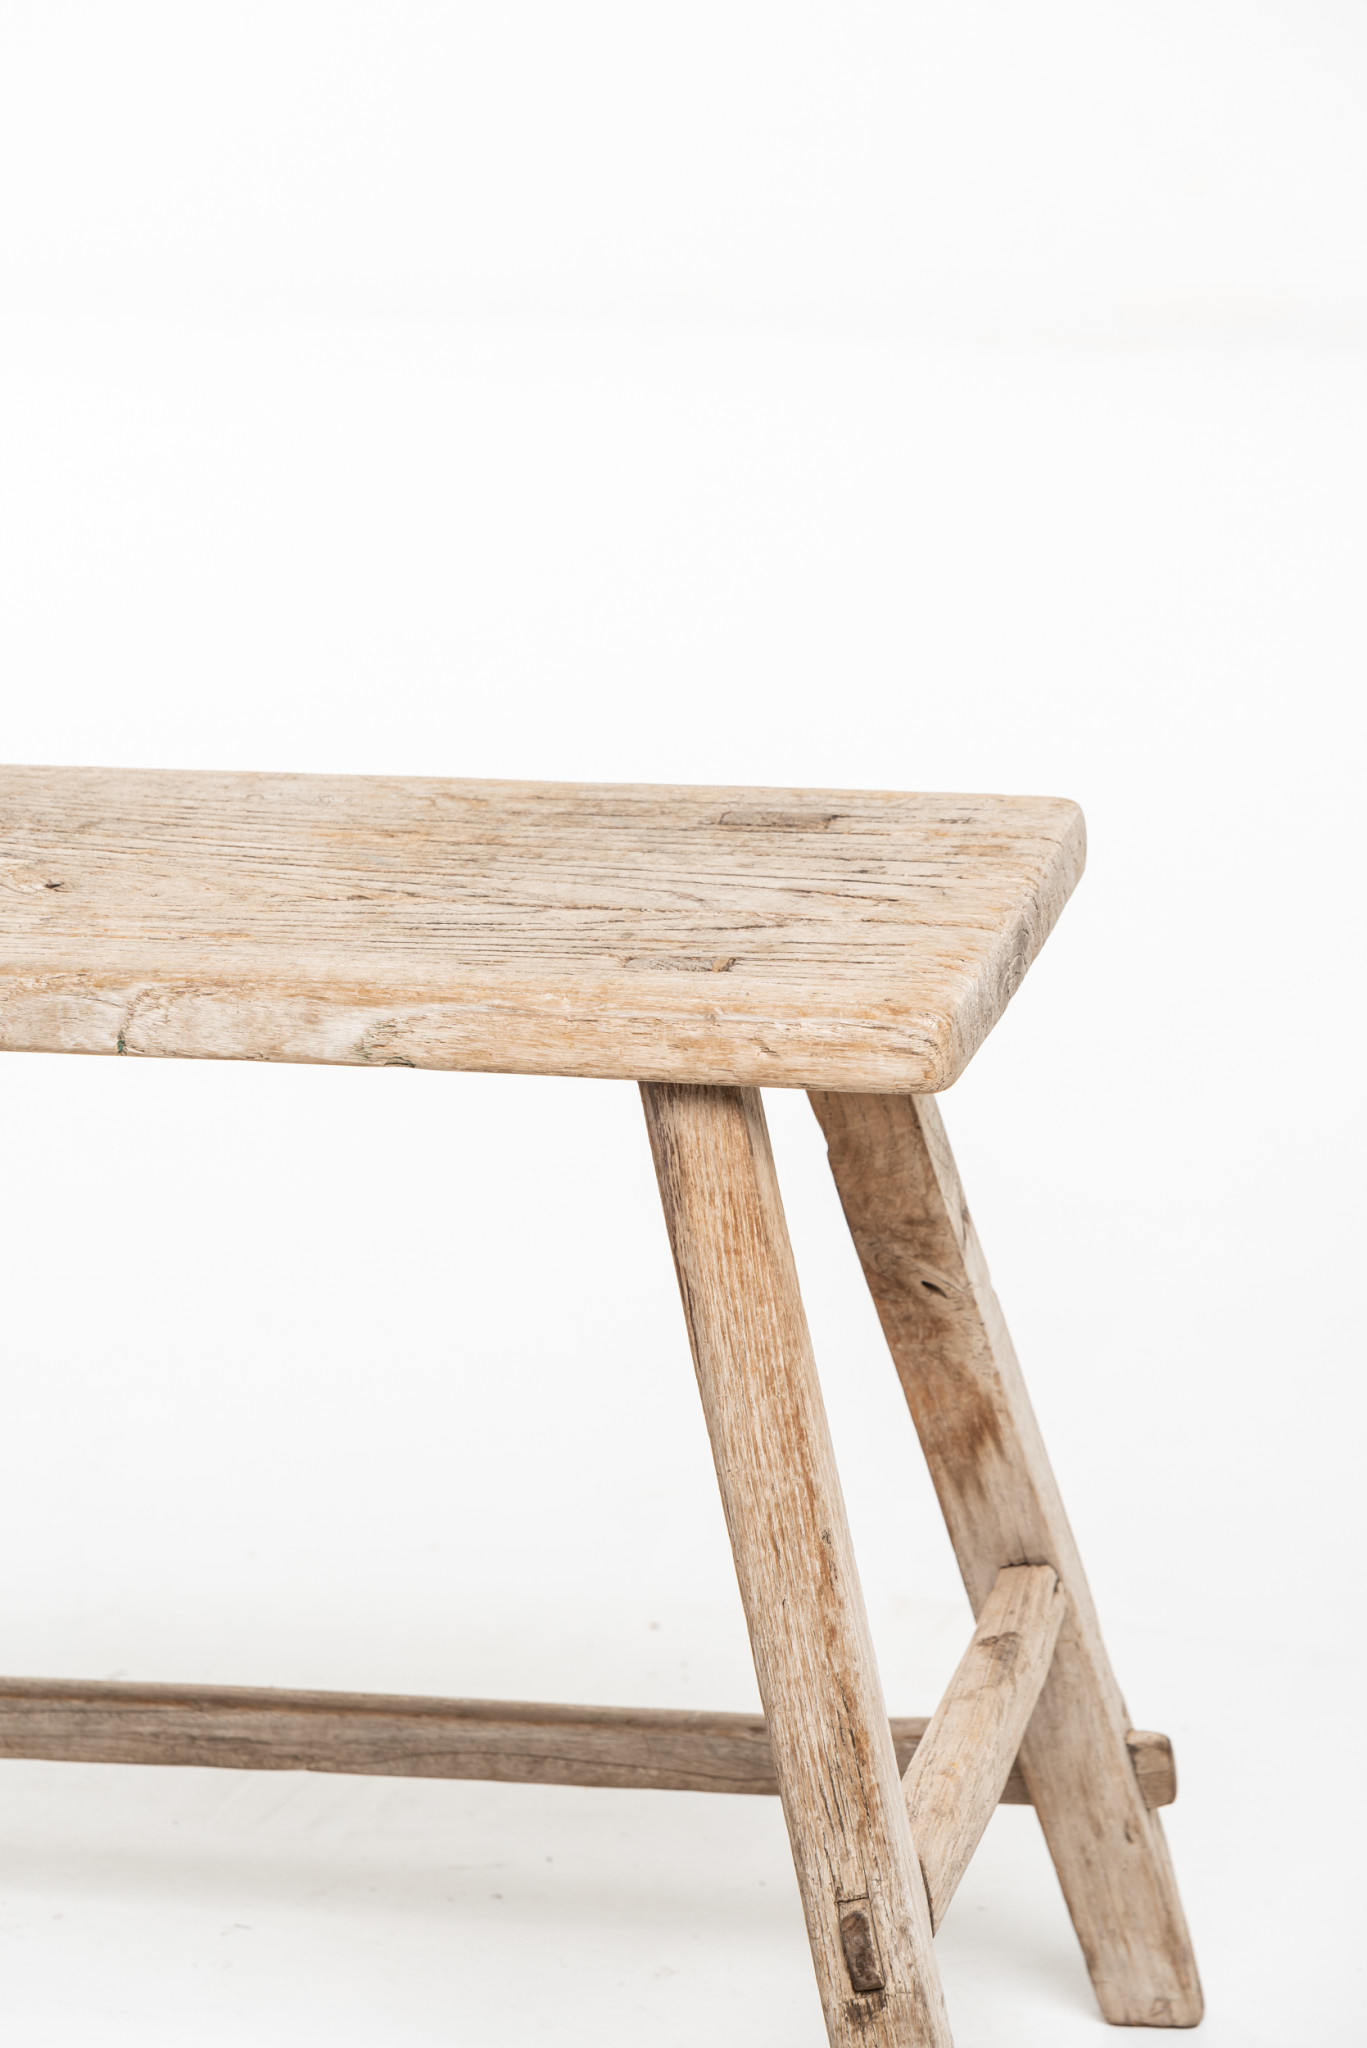 antique wooden bench by couleur locale